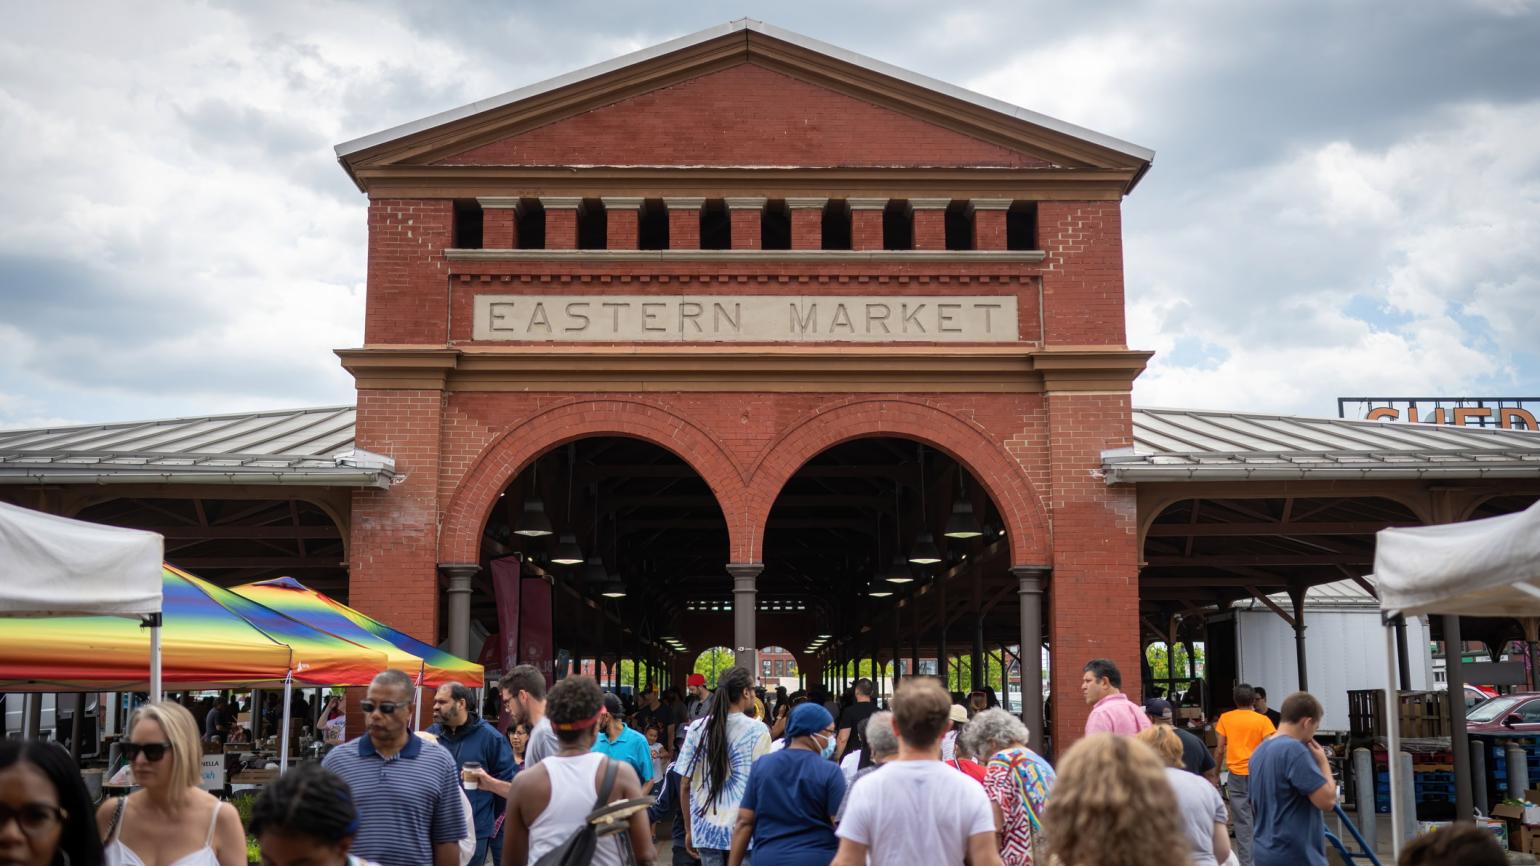 A summer crowd moves beneath a brick pavilion that rises in the background. The pavilion has a sign that says Eastern Market.